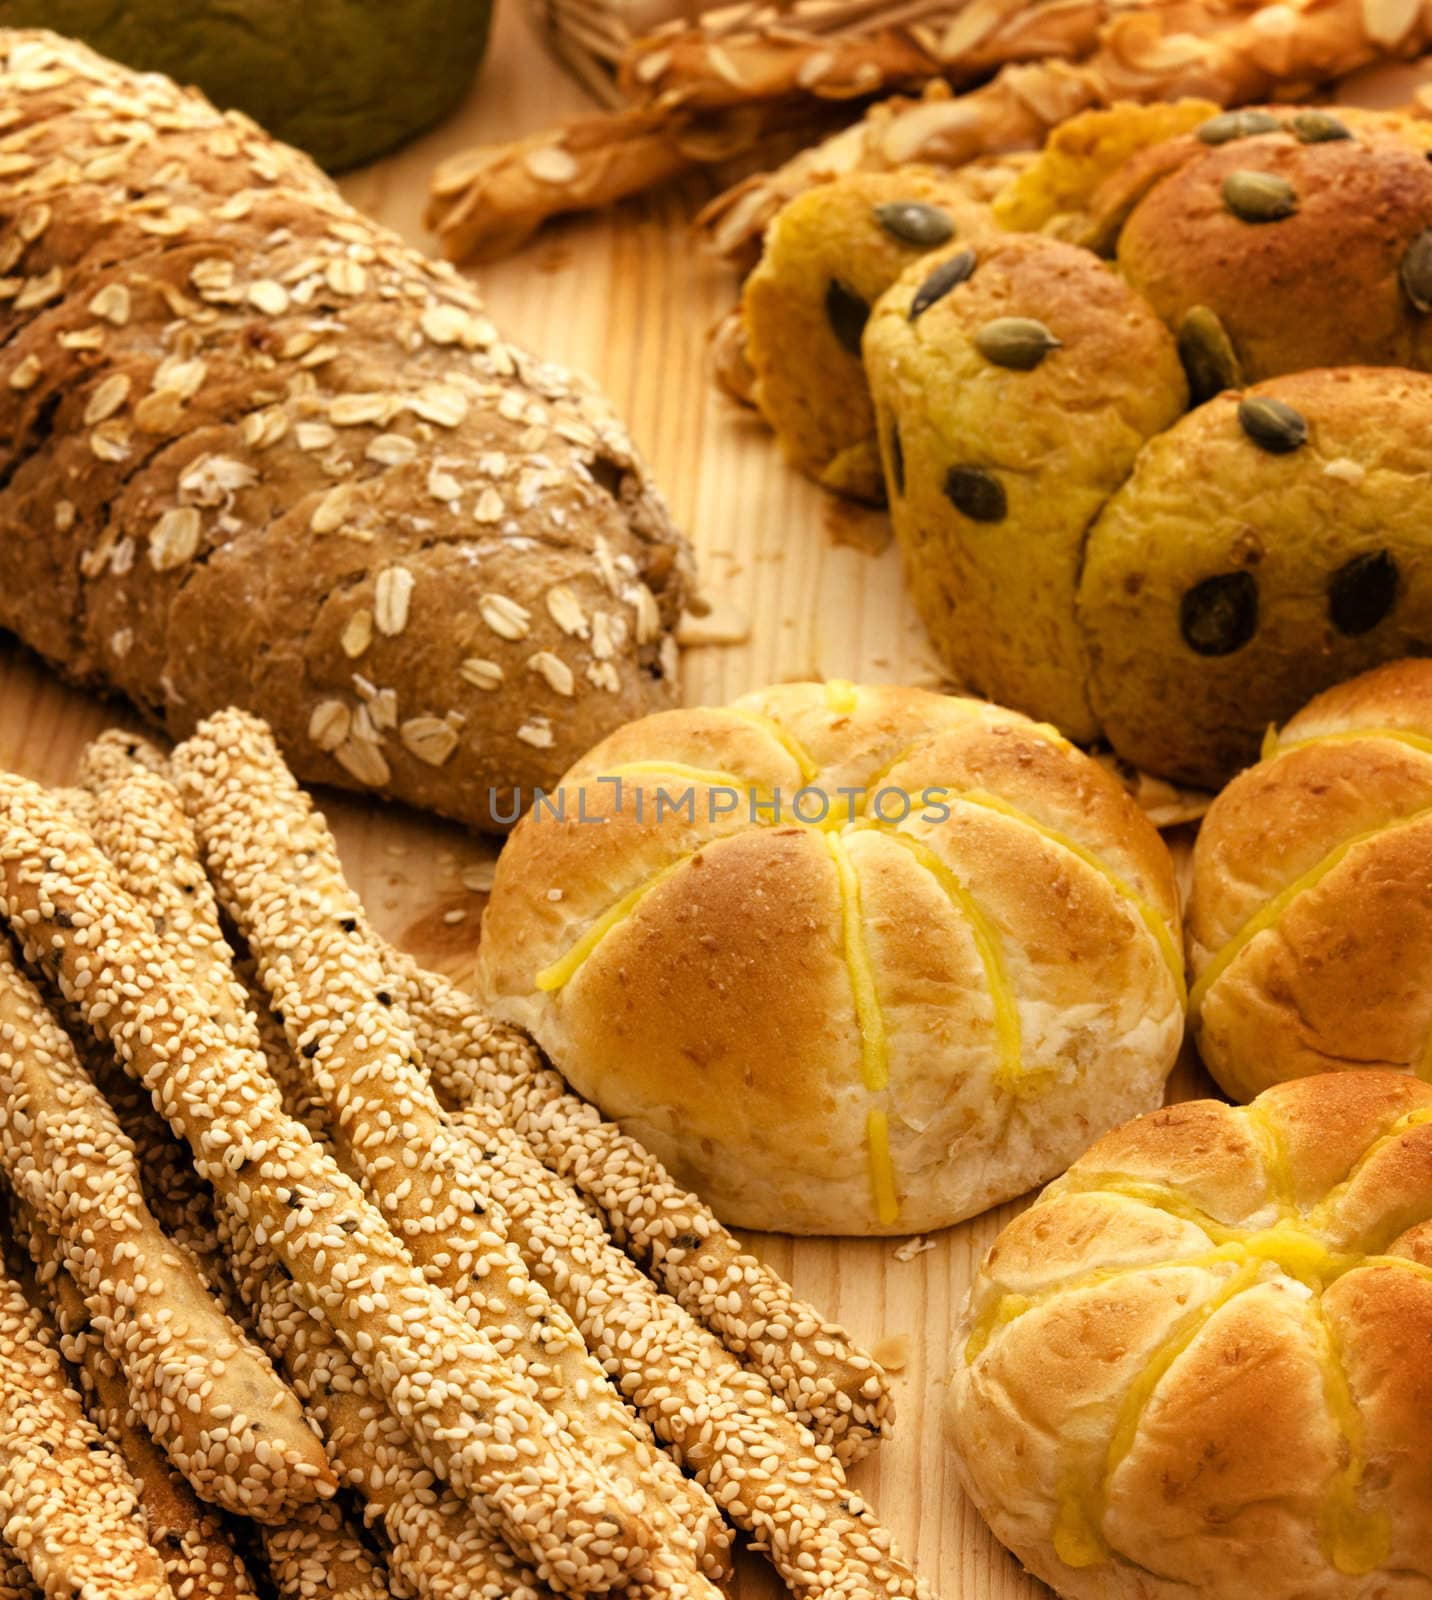 Variety of Breads by szefei